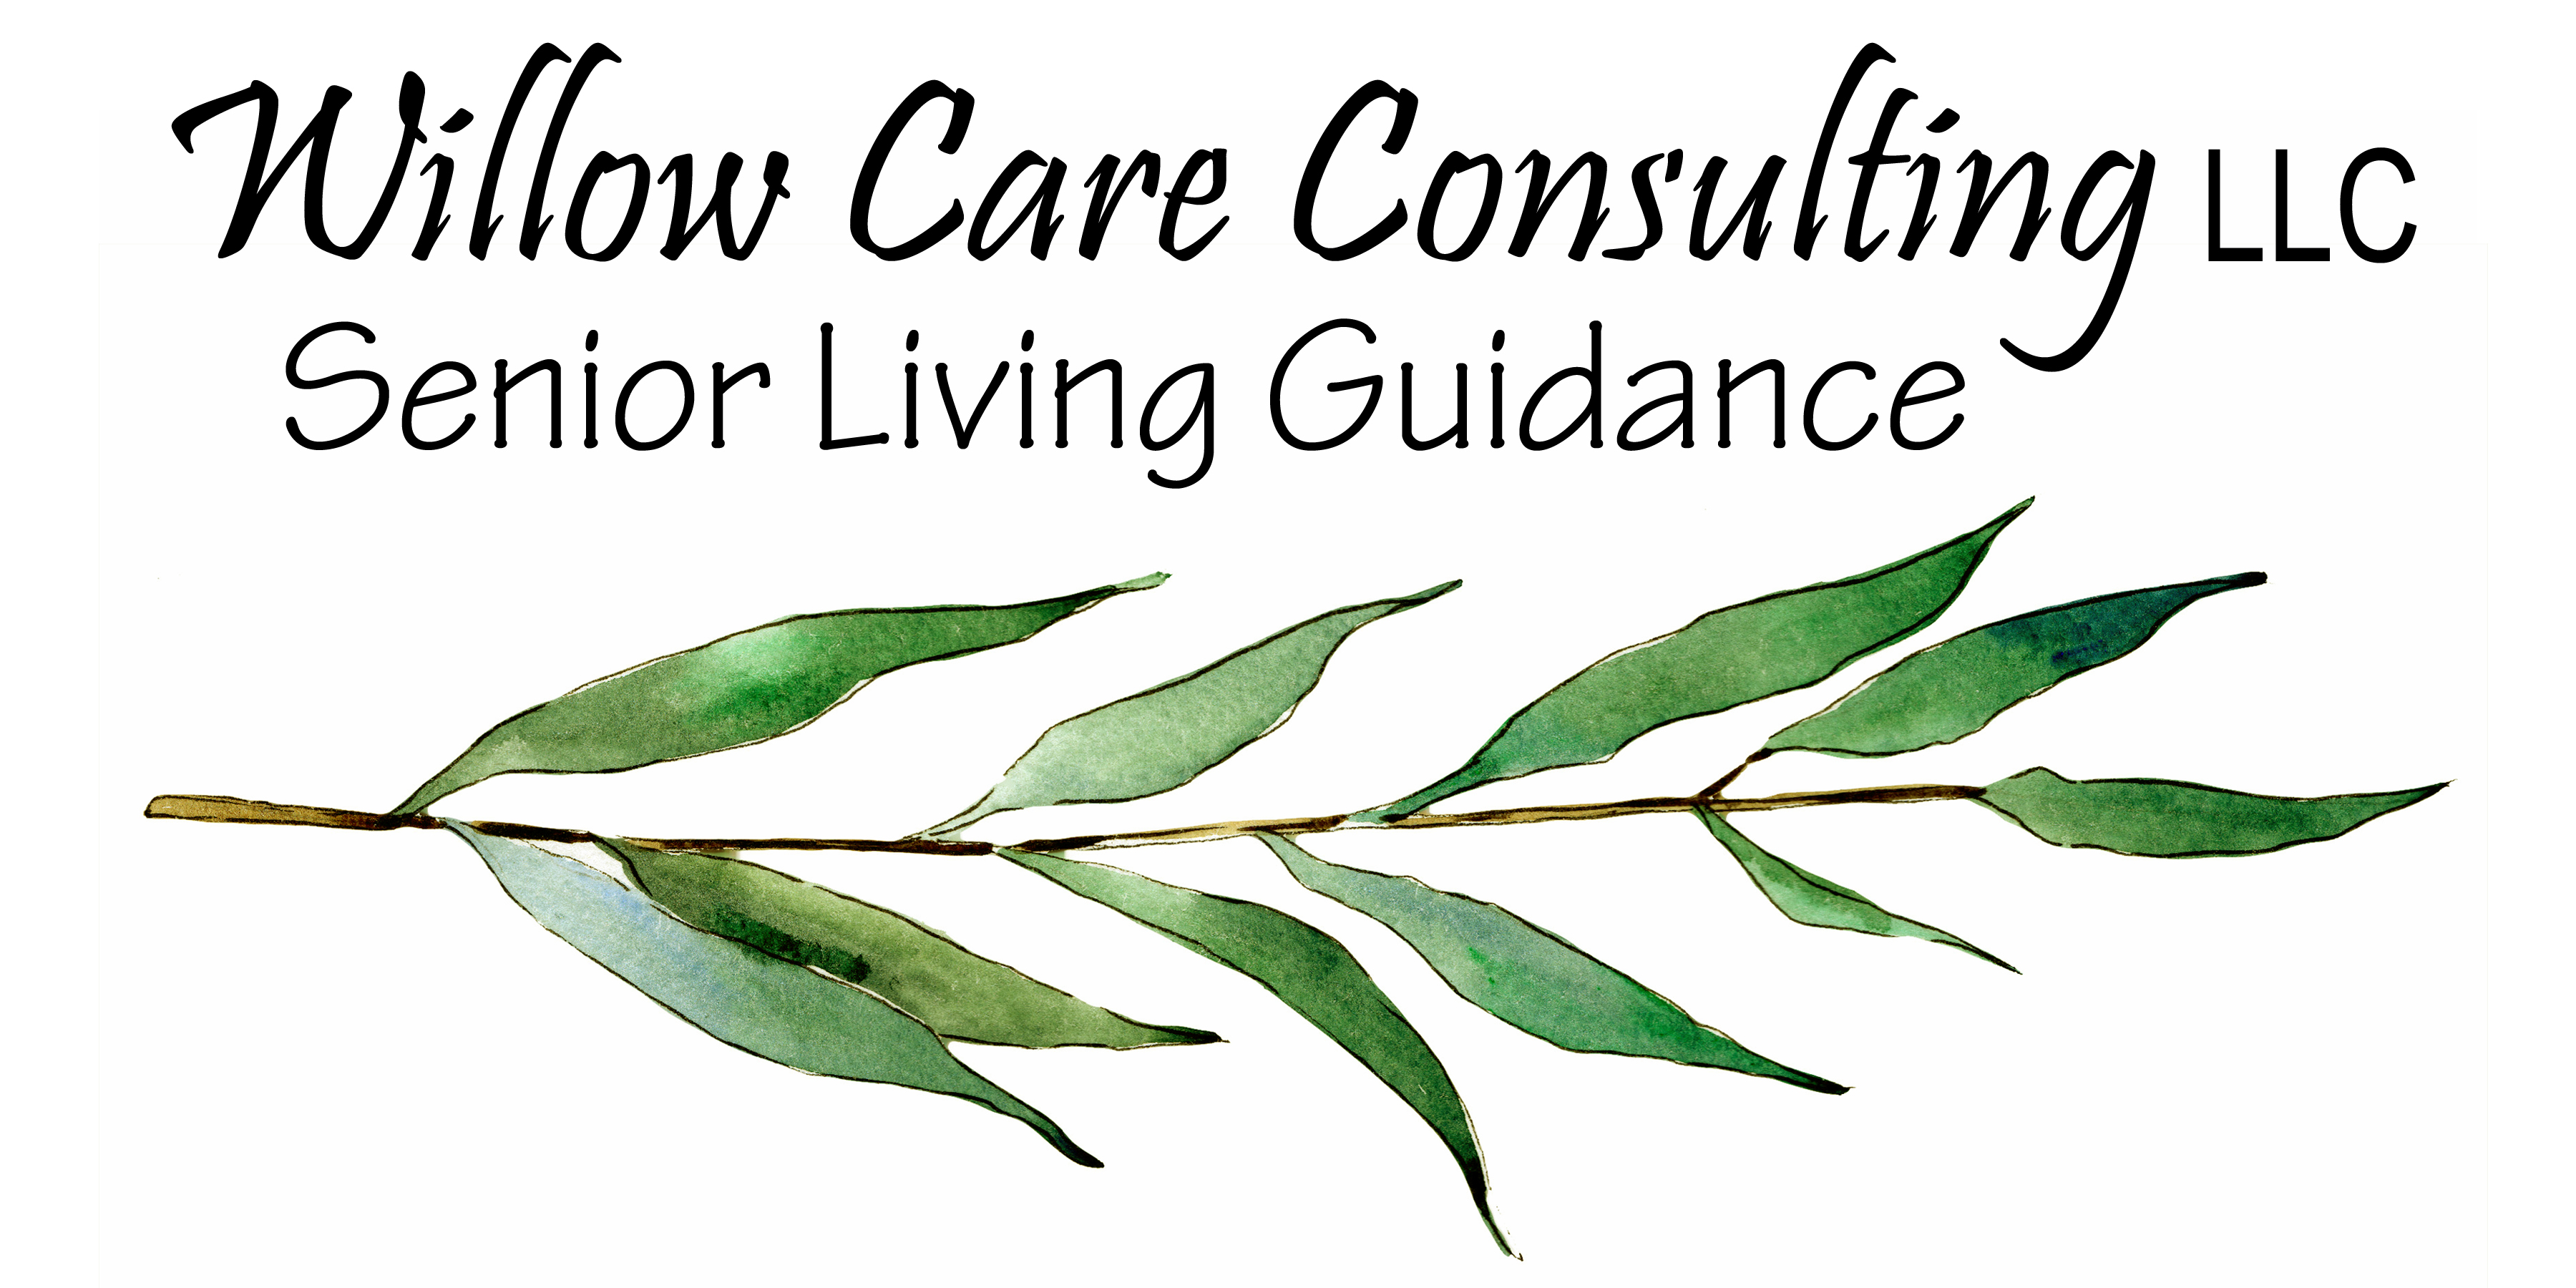 #4 b Willow Care Consulting, LLC (Plata)